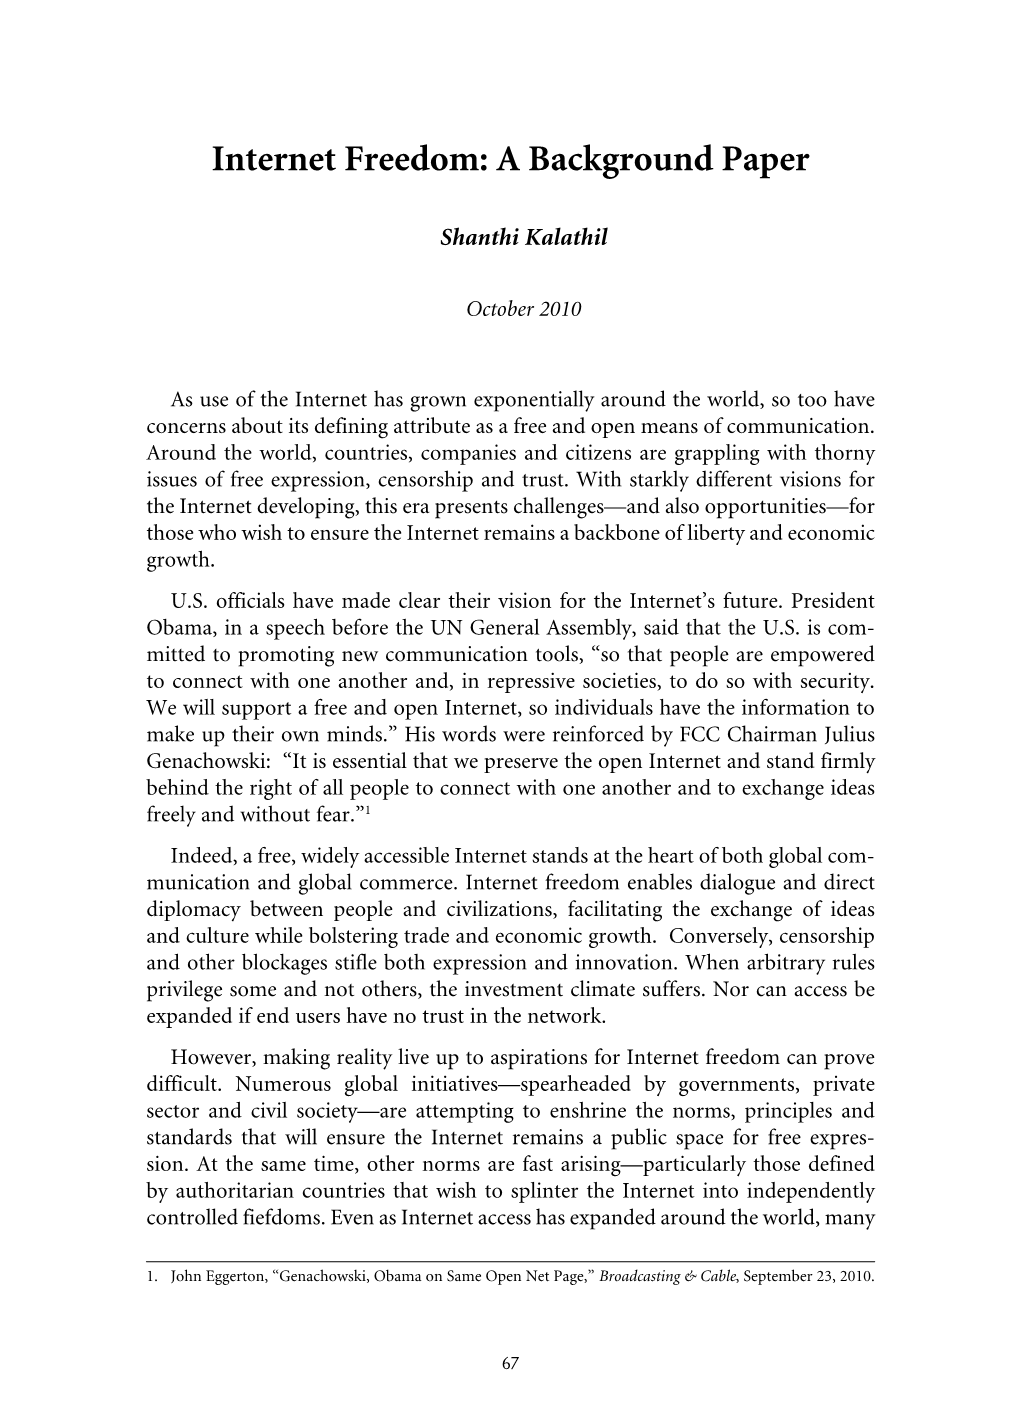 Internet Freedom: a Background Paper